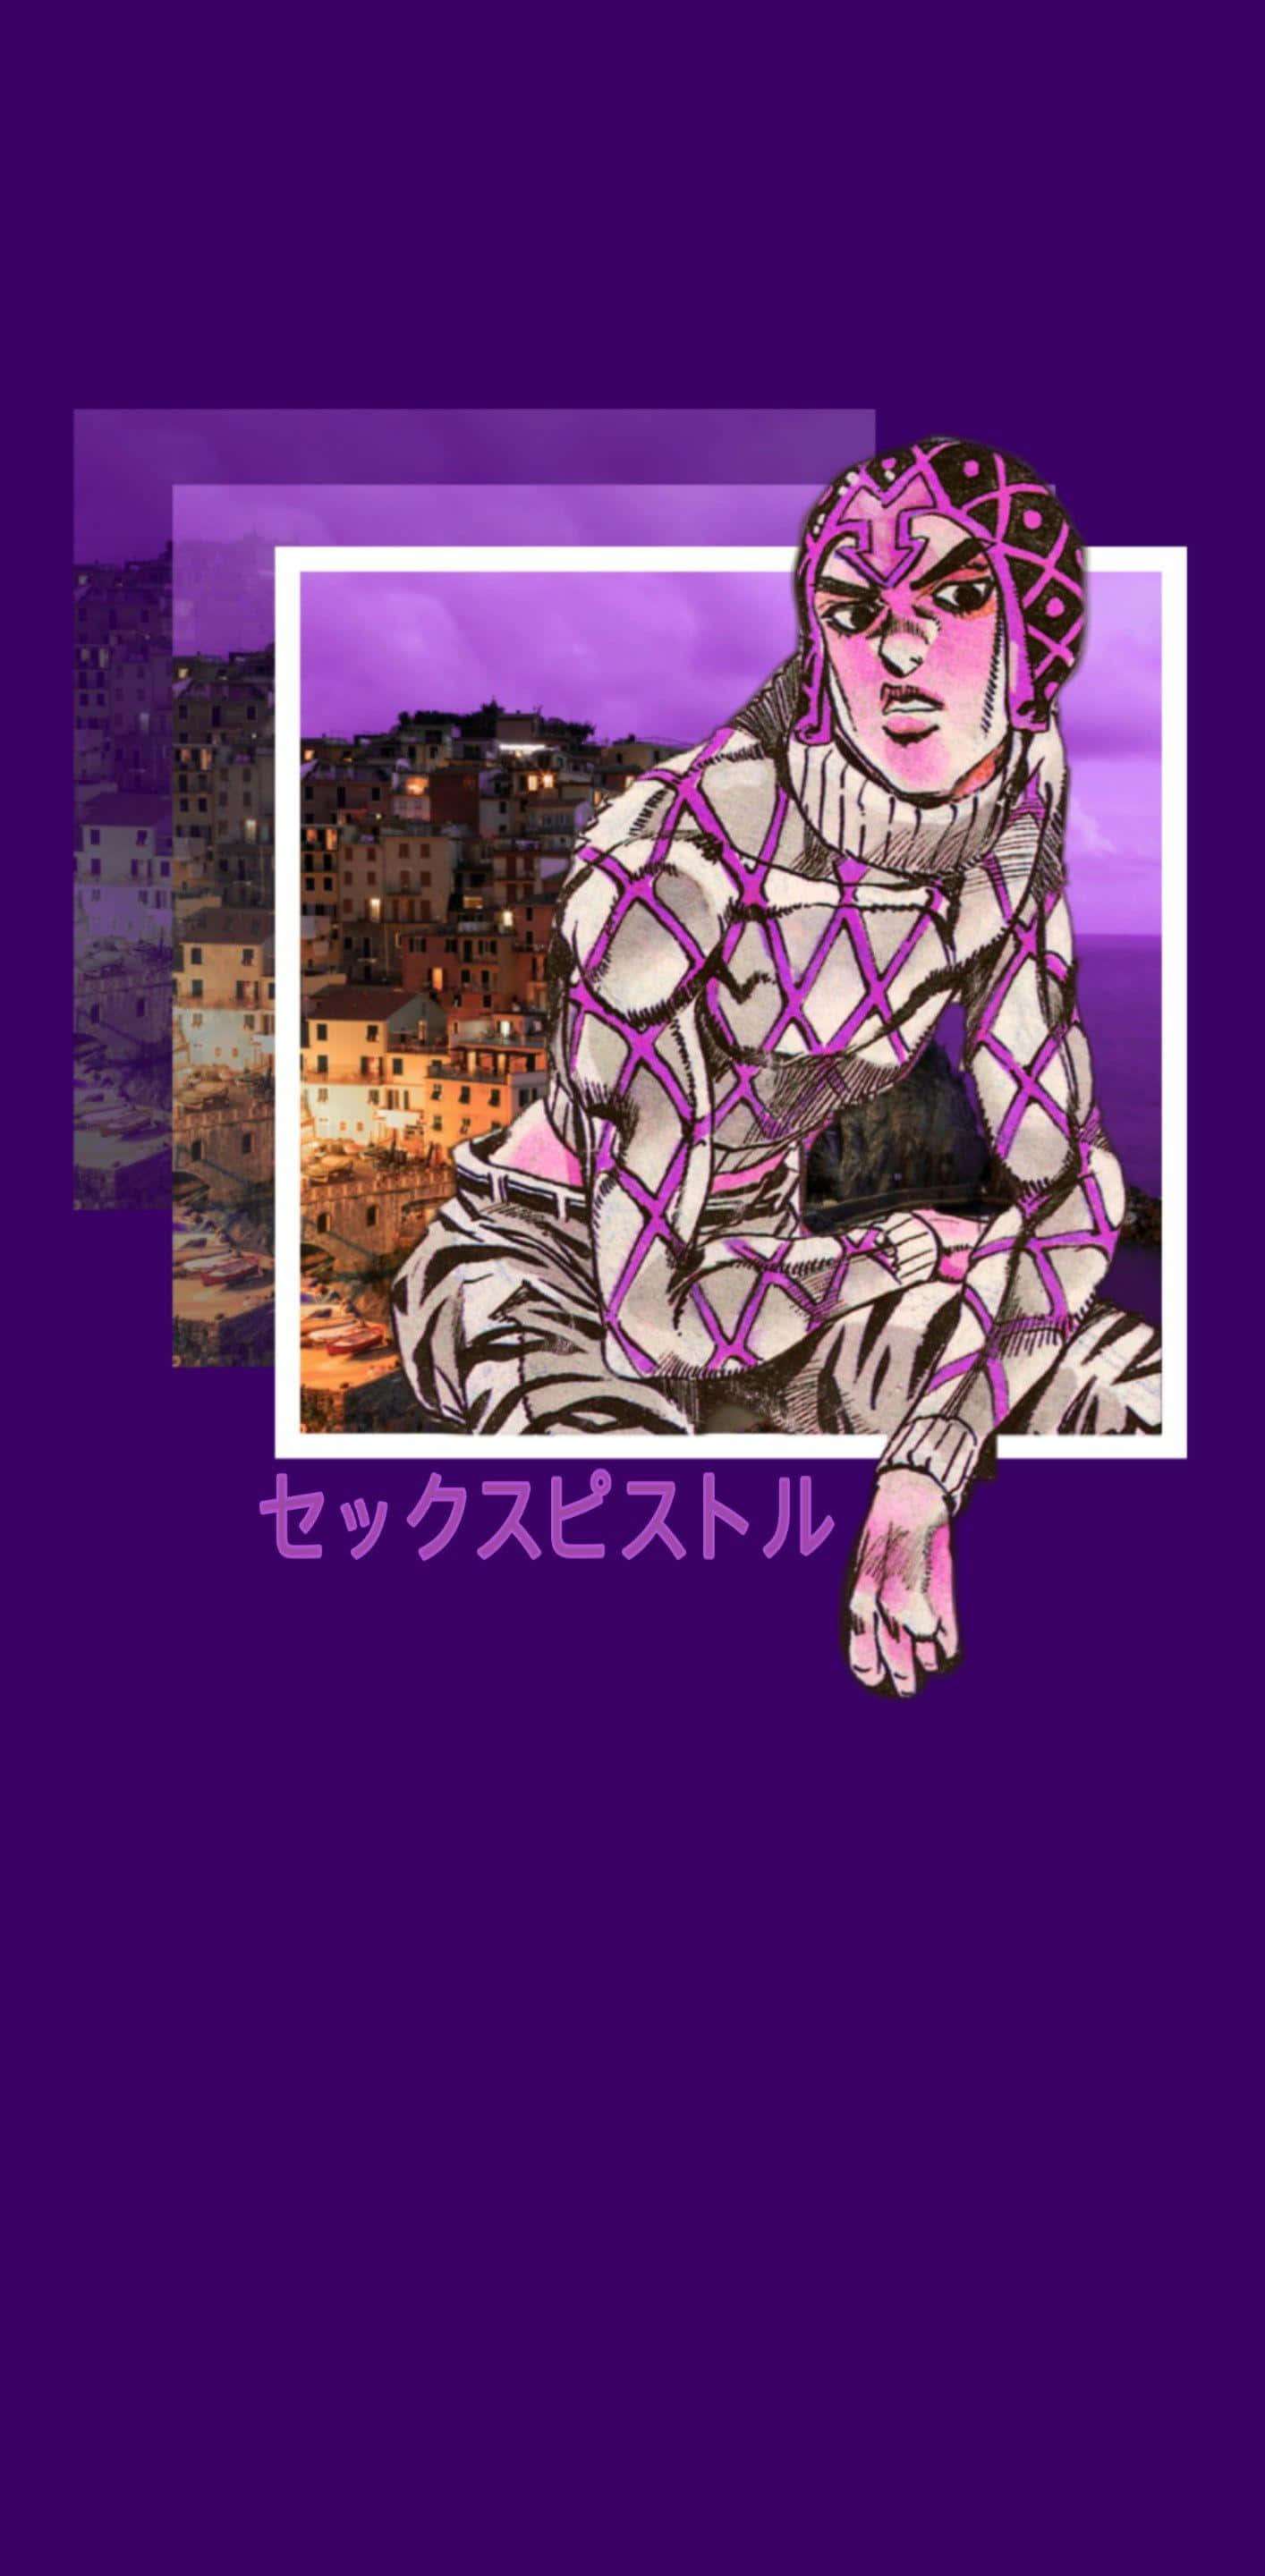 Download Guido Mista The Sharpshooter From Jojos Bizarre Adventure Posing With His Multi 4438